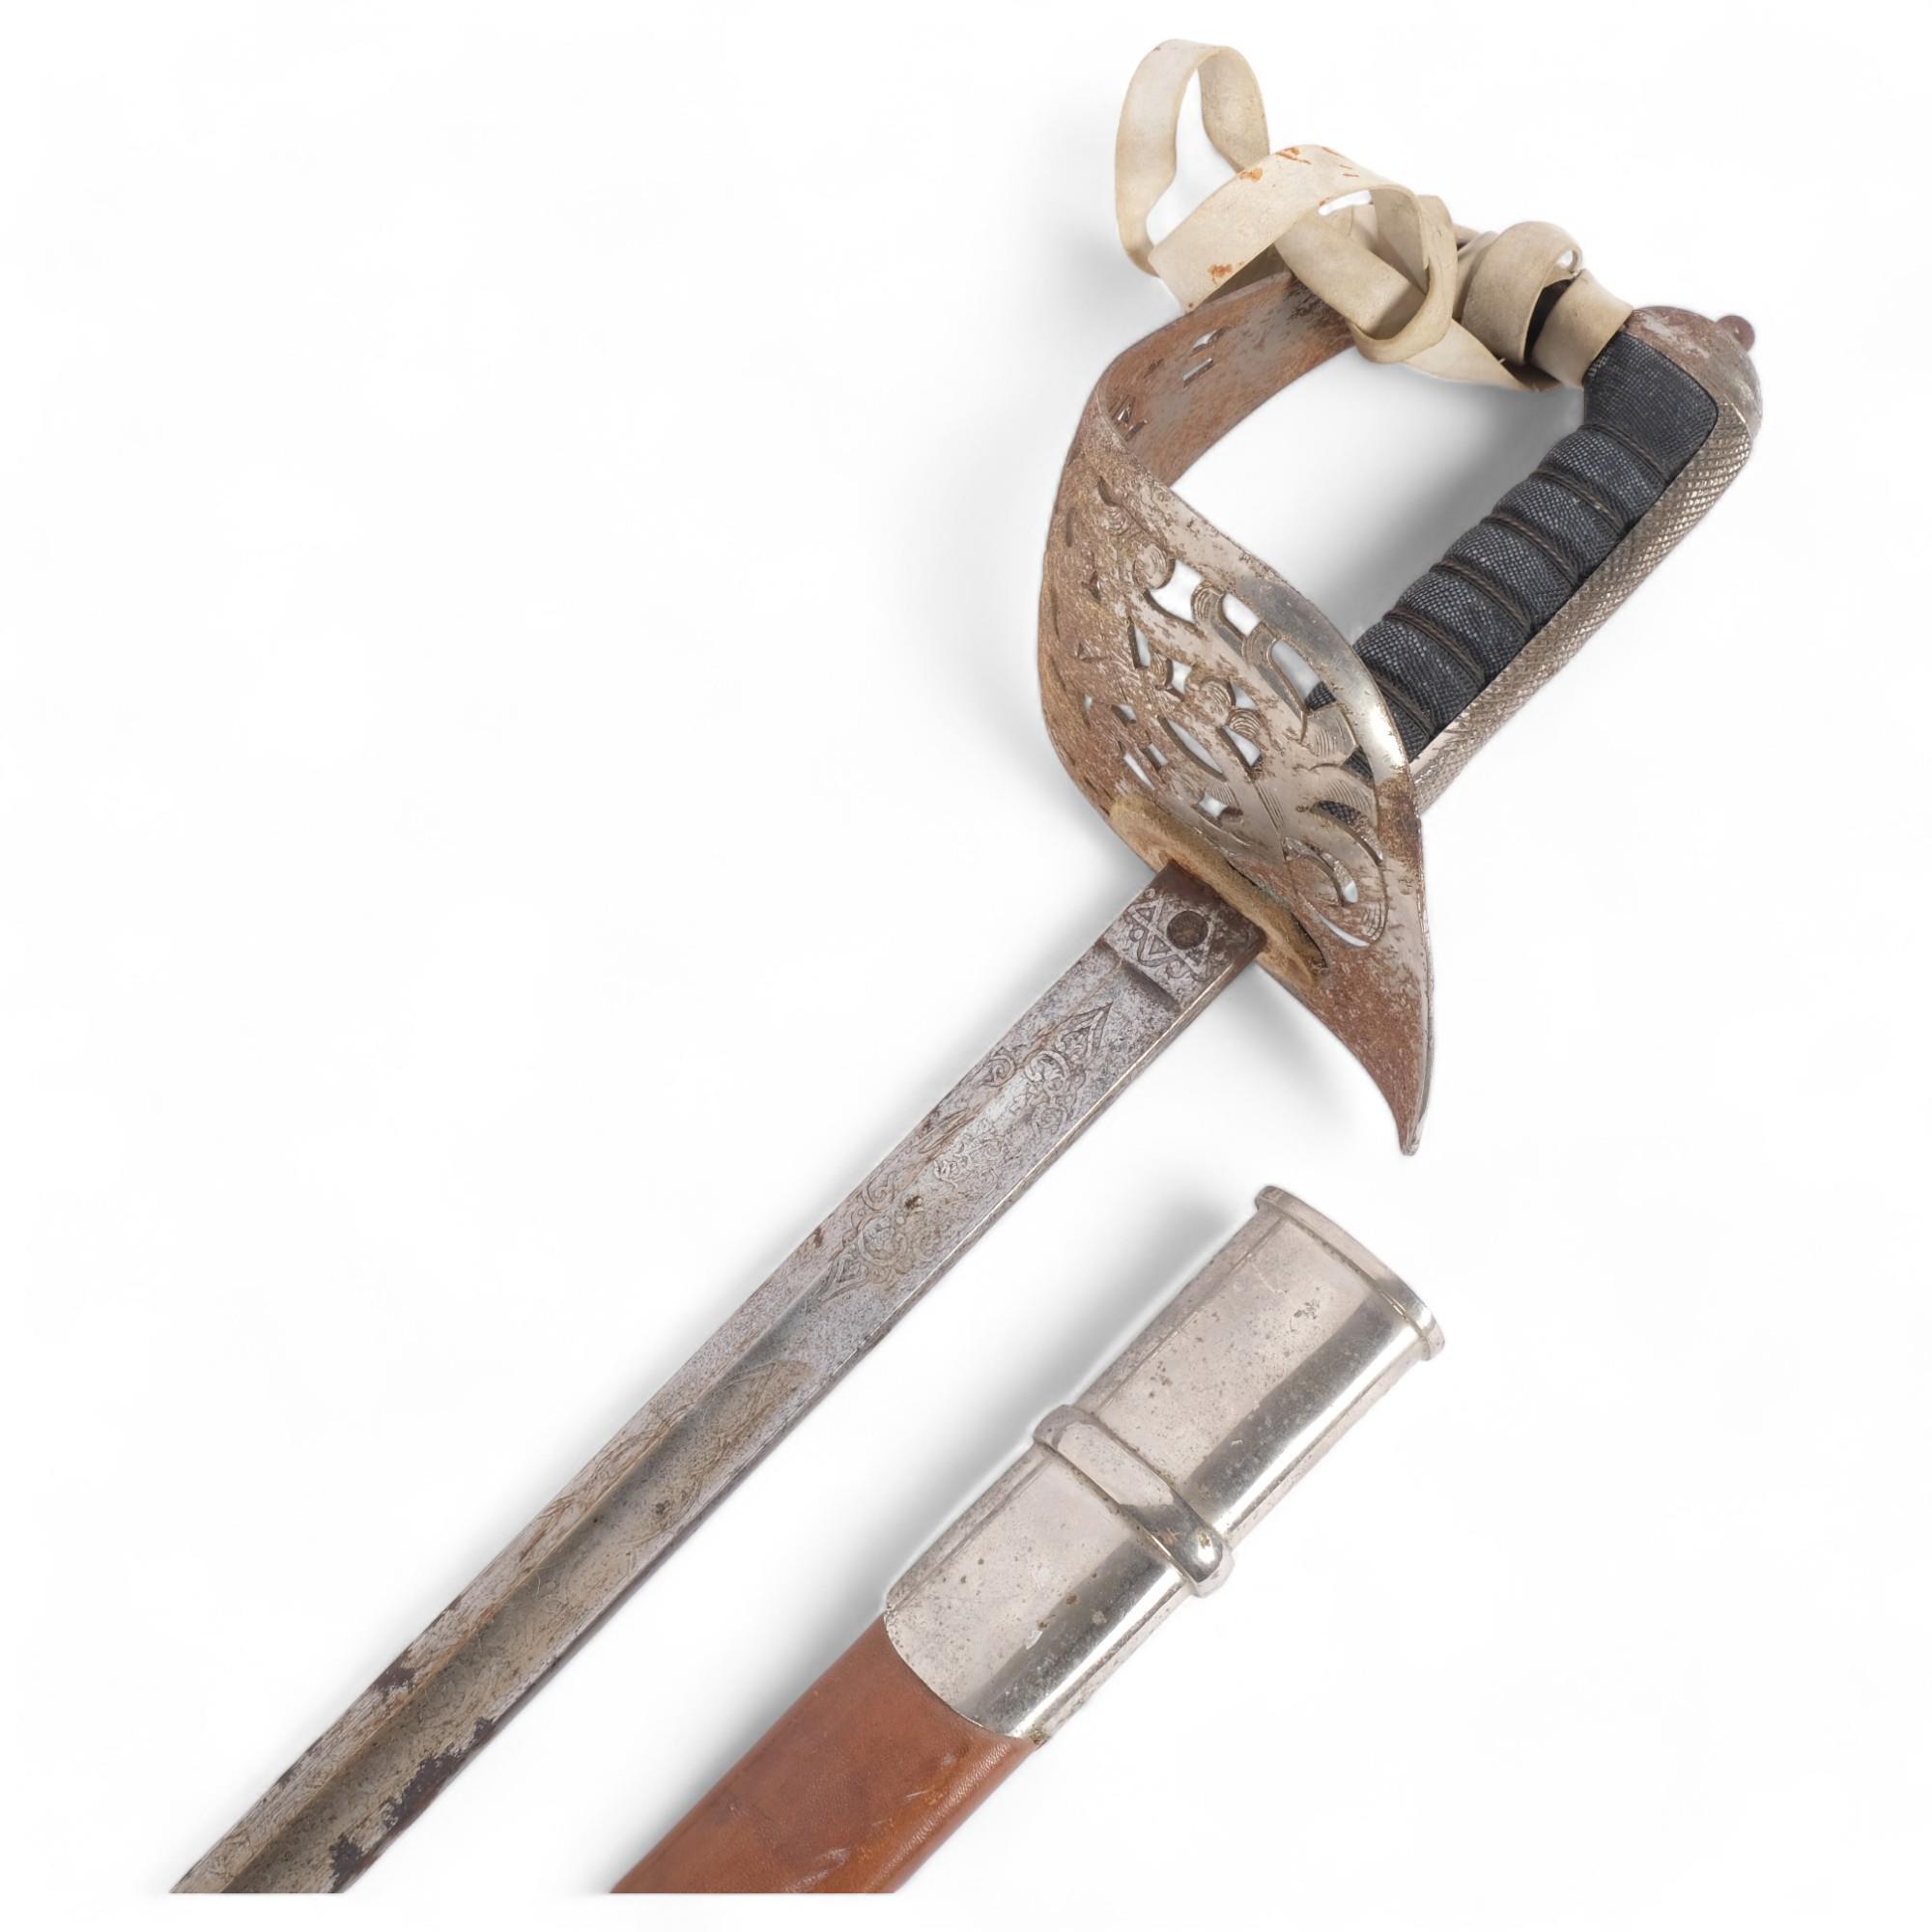 A George V 1897 pattern infantry Officer's sword, Hobson & Sons, having etched blade and shagreen